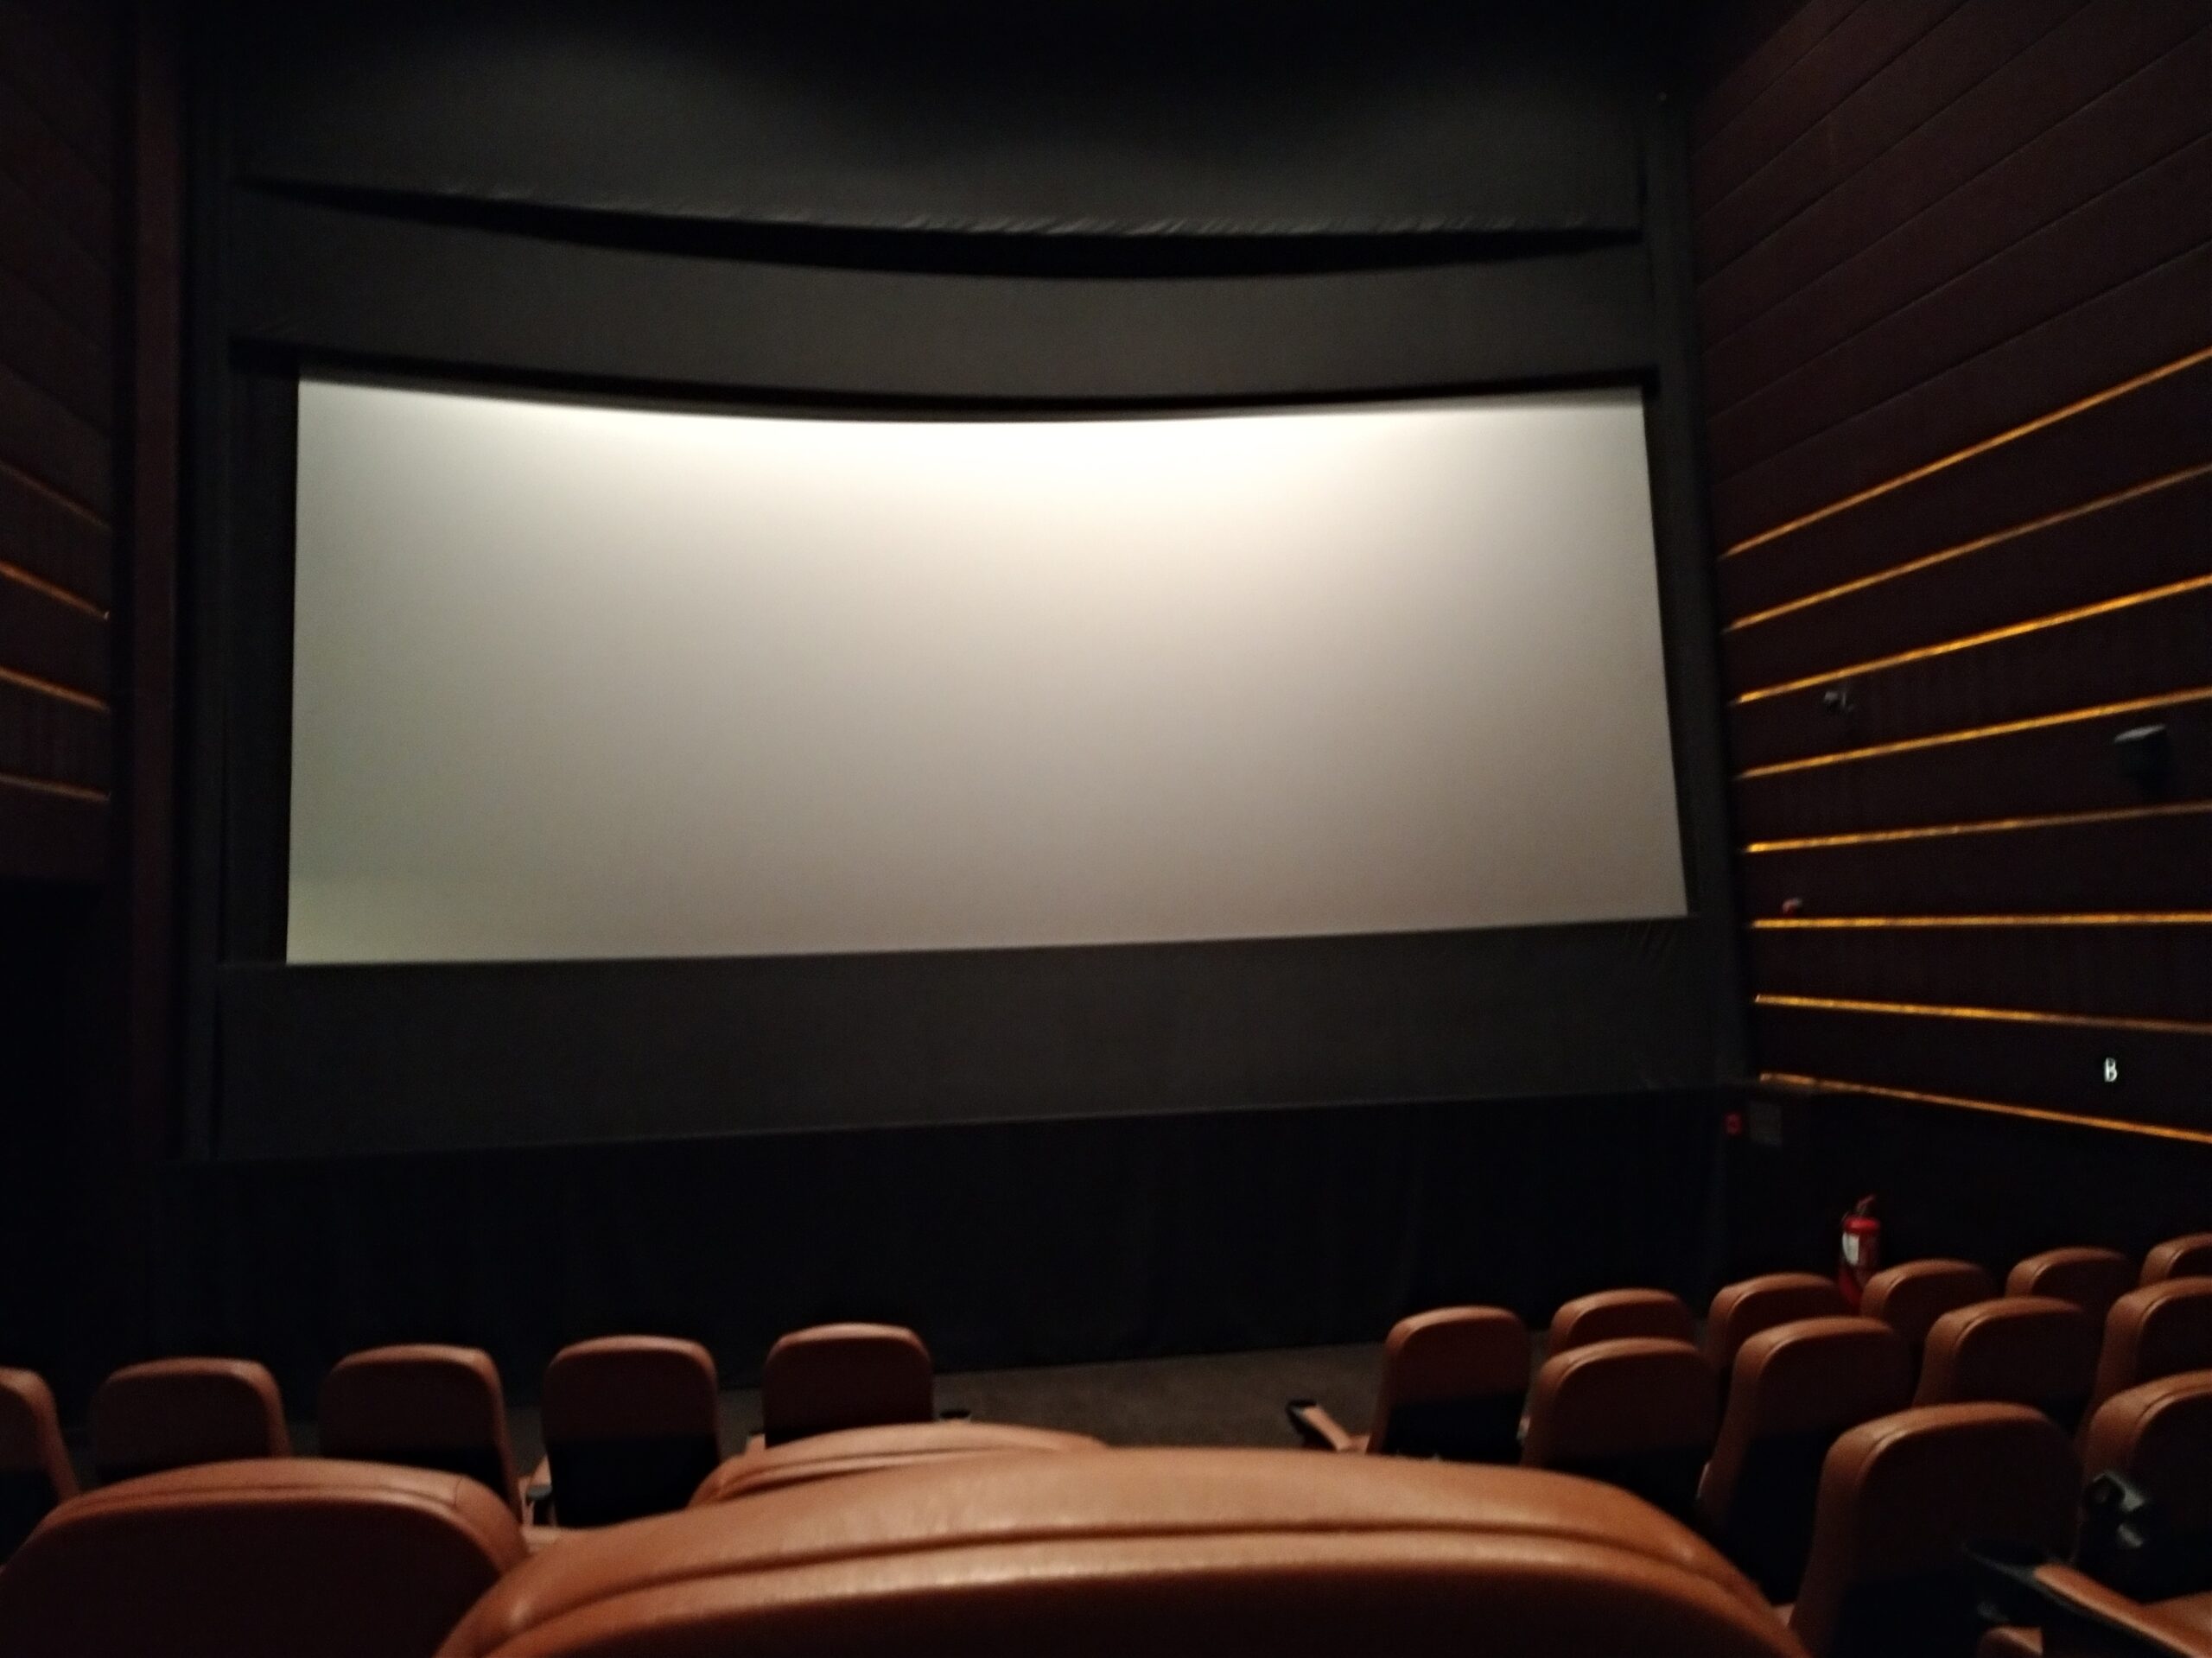 During the epidemic, Chinese cinemas finally reopened